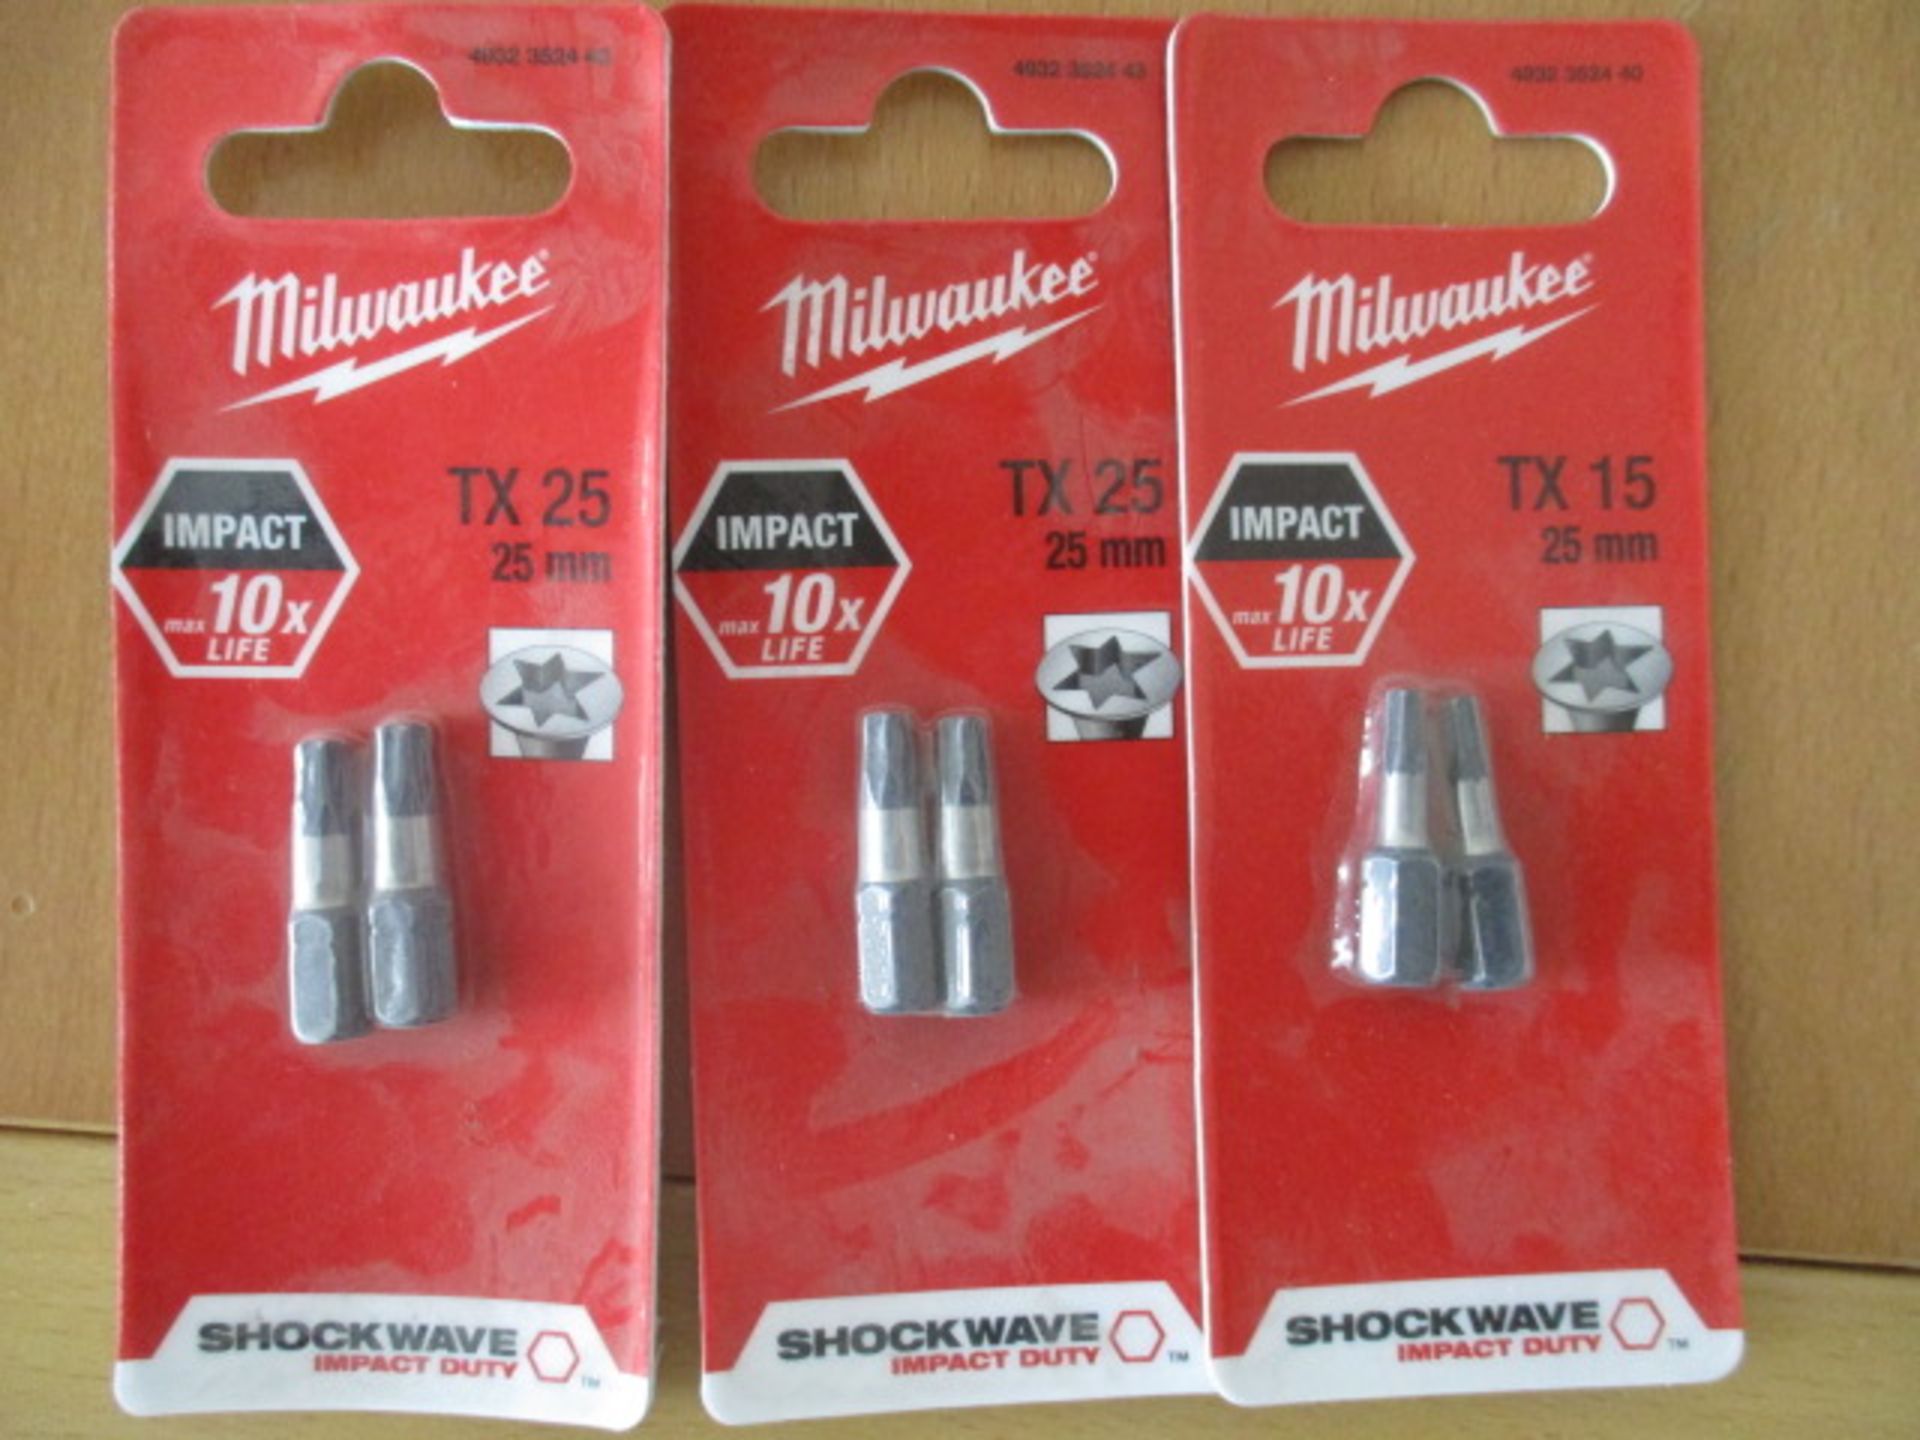 3pcs in pack Milwaukee premium drill bits as pictured.